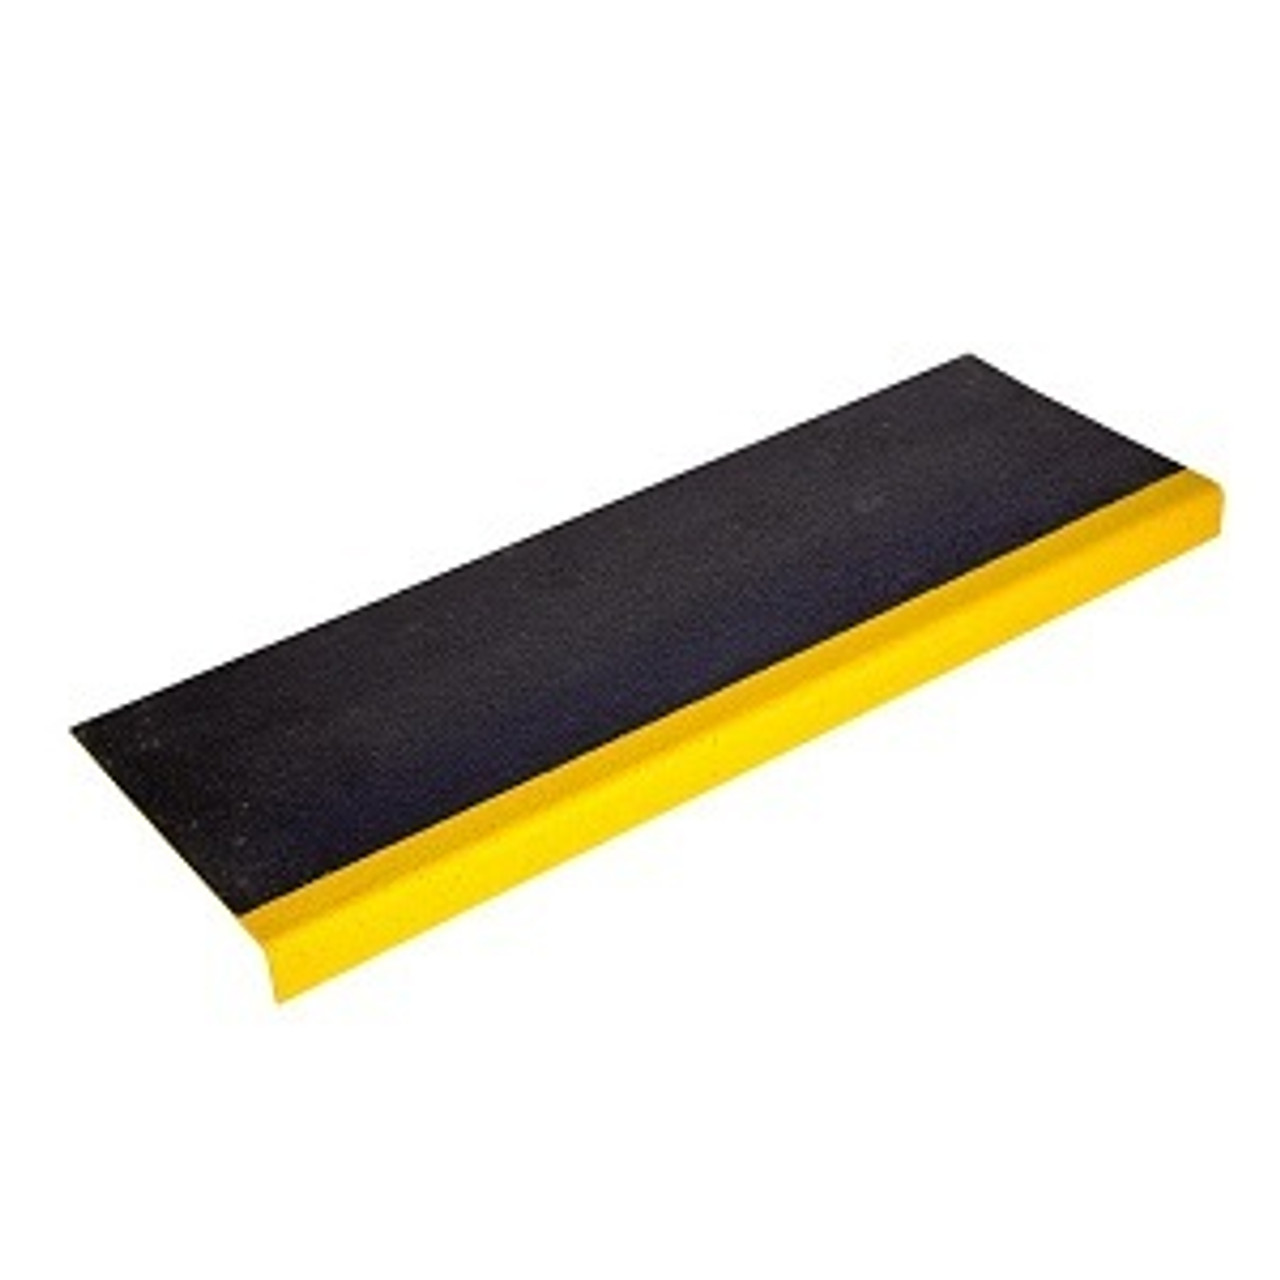 Stair Tread Covers and Nosings